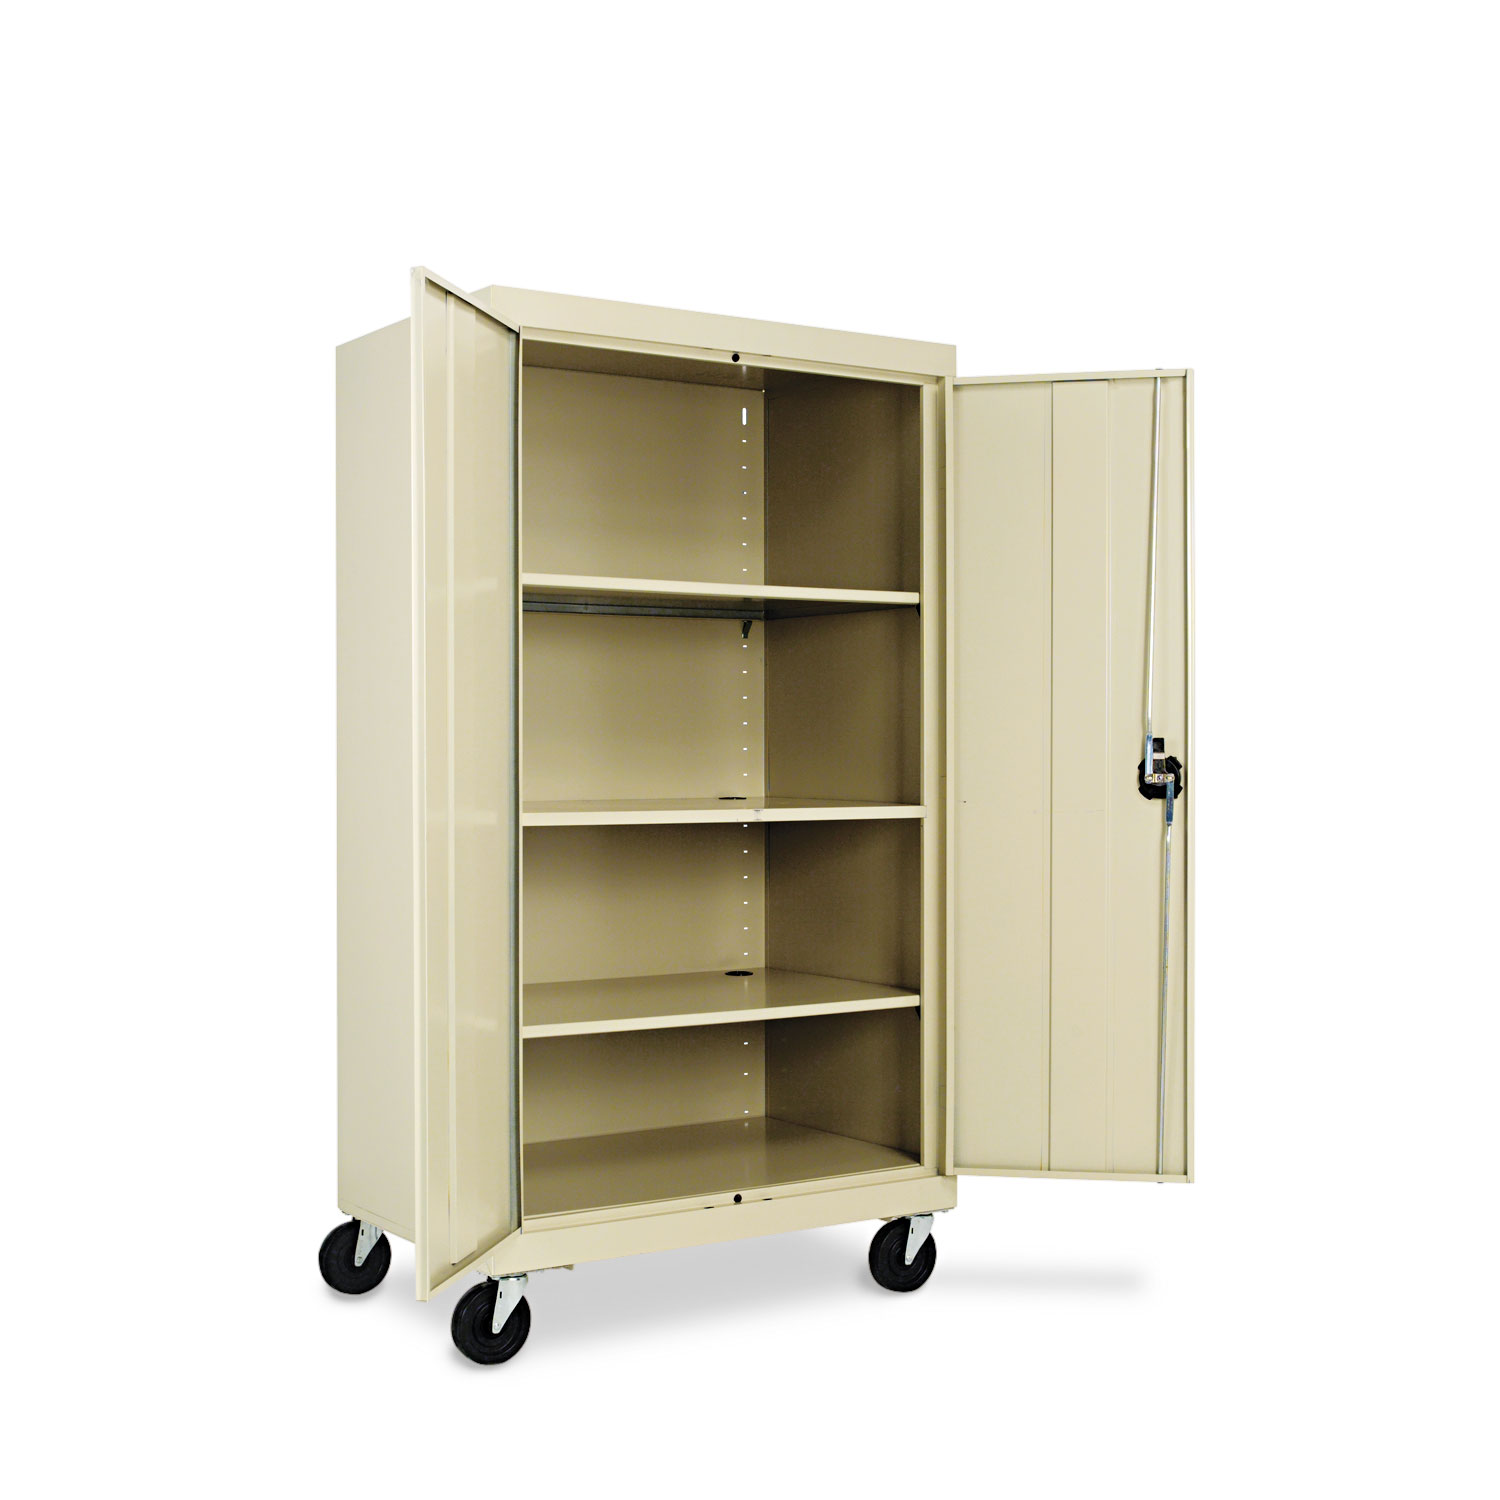 Mobile Storage Cabinet, w/Adjustable Shelves 36w x 24d x 66h, Putty